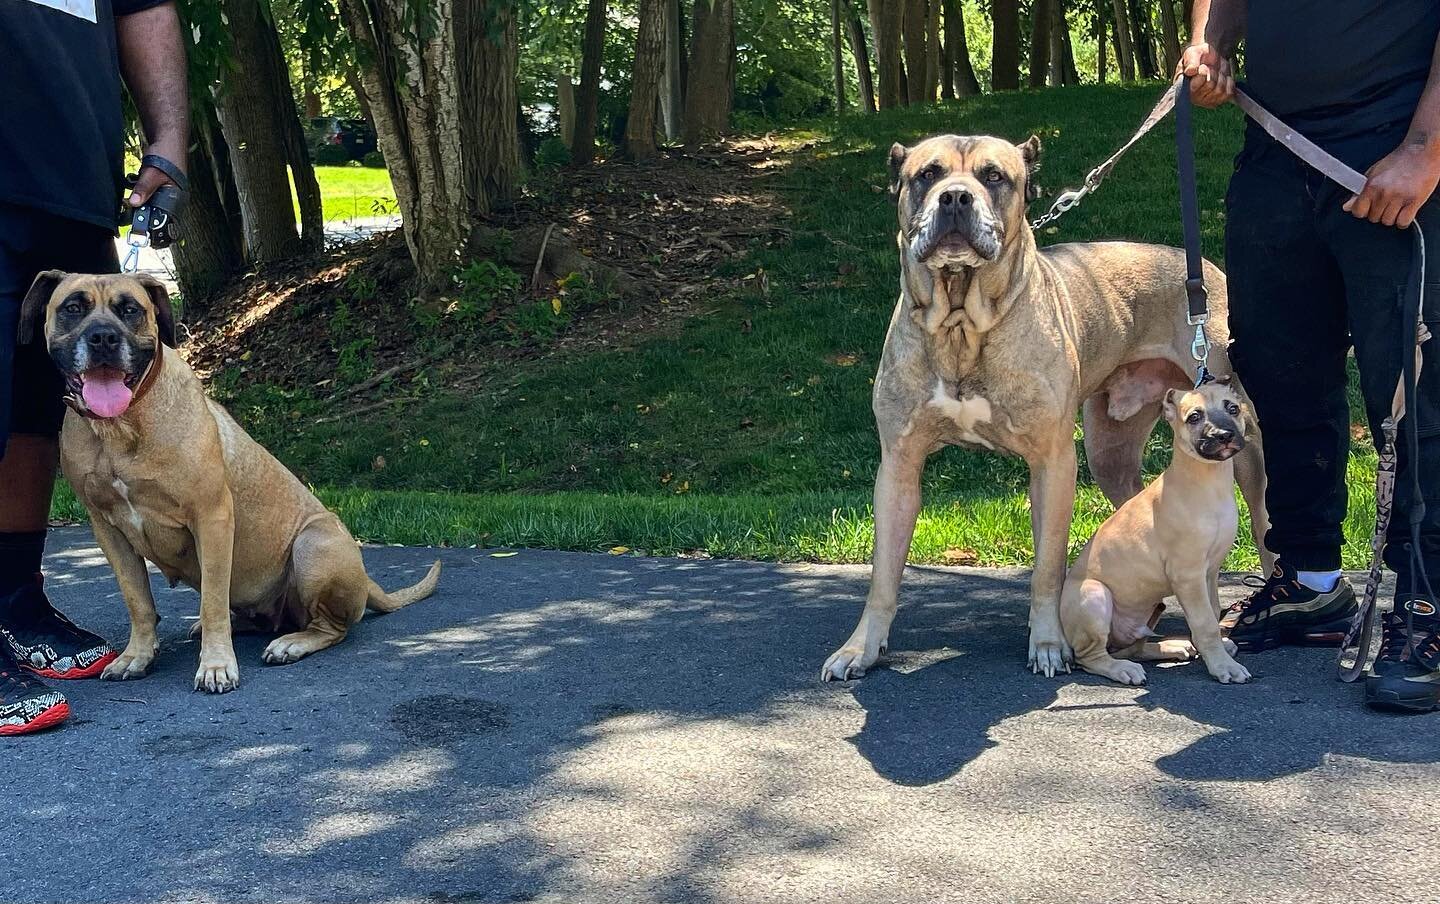 TBT: Three Generations of Savant Bred Dogs - linebred Bella
.
Phase one of the program was predicated on solidifying a mastiff base. For all the size and power - mastiffs bring a level of sensitivity and perception that is unparalleled. They&rsquo;re